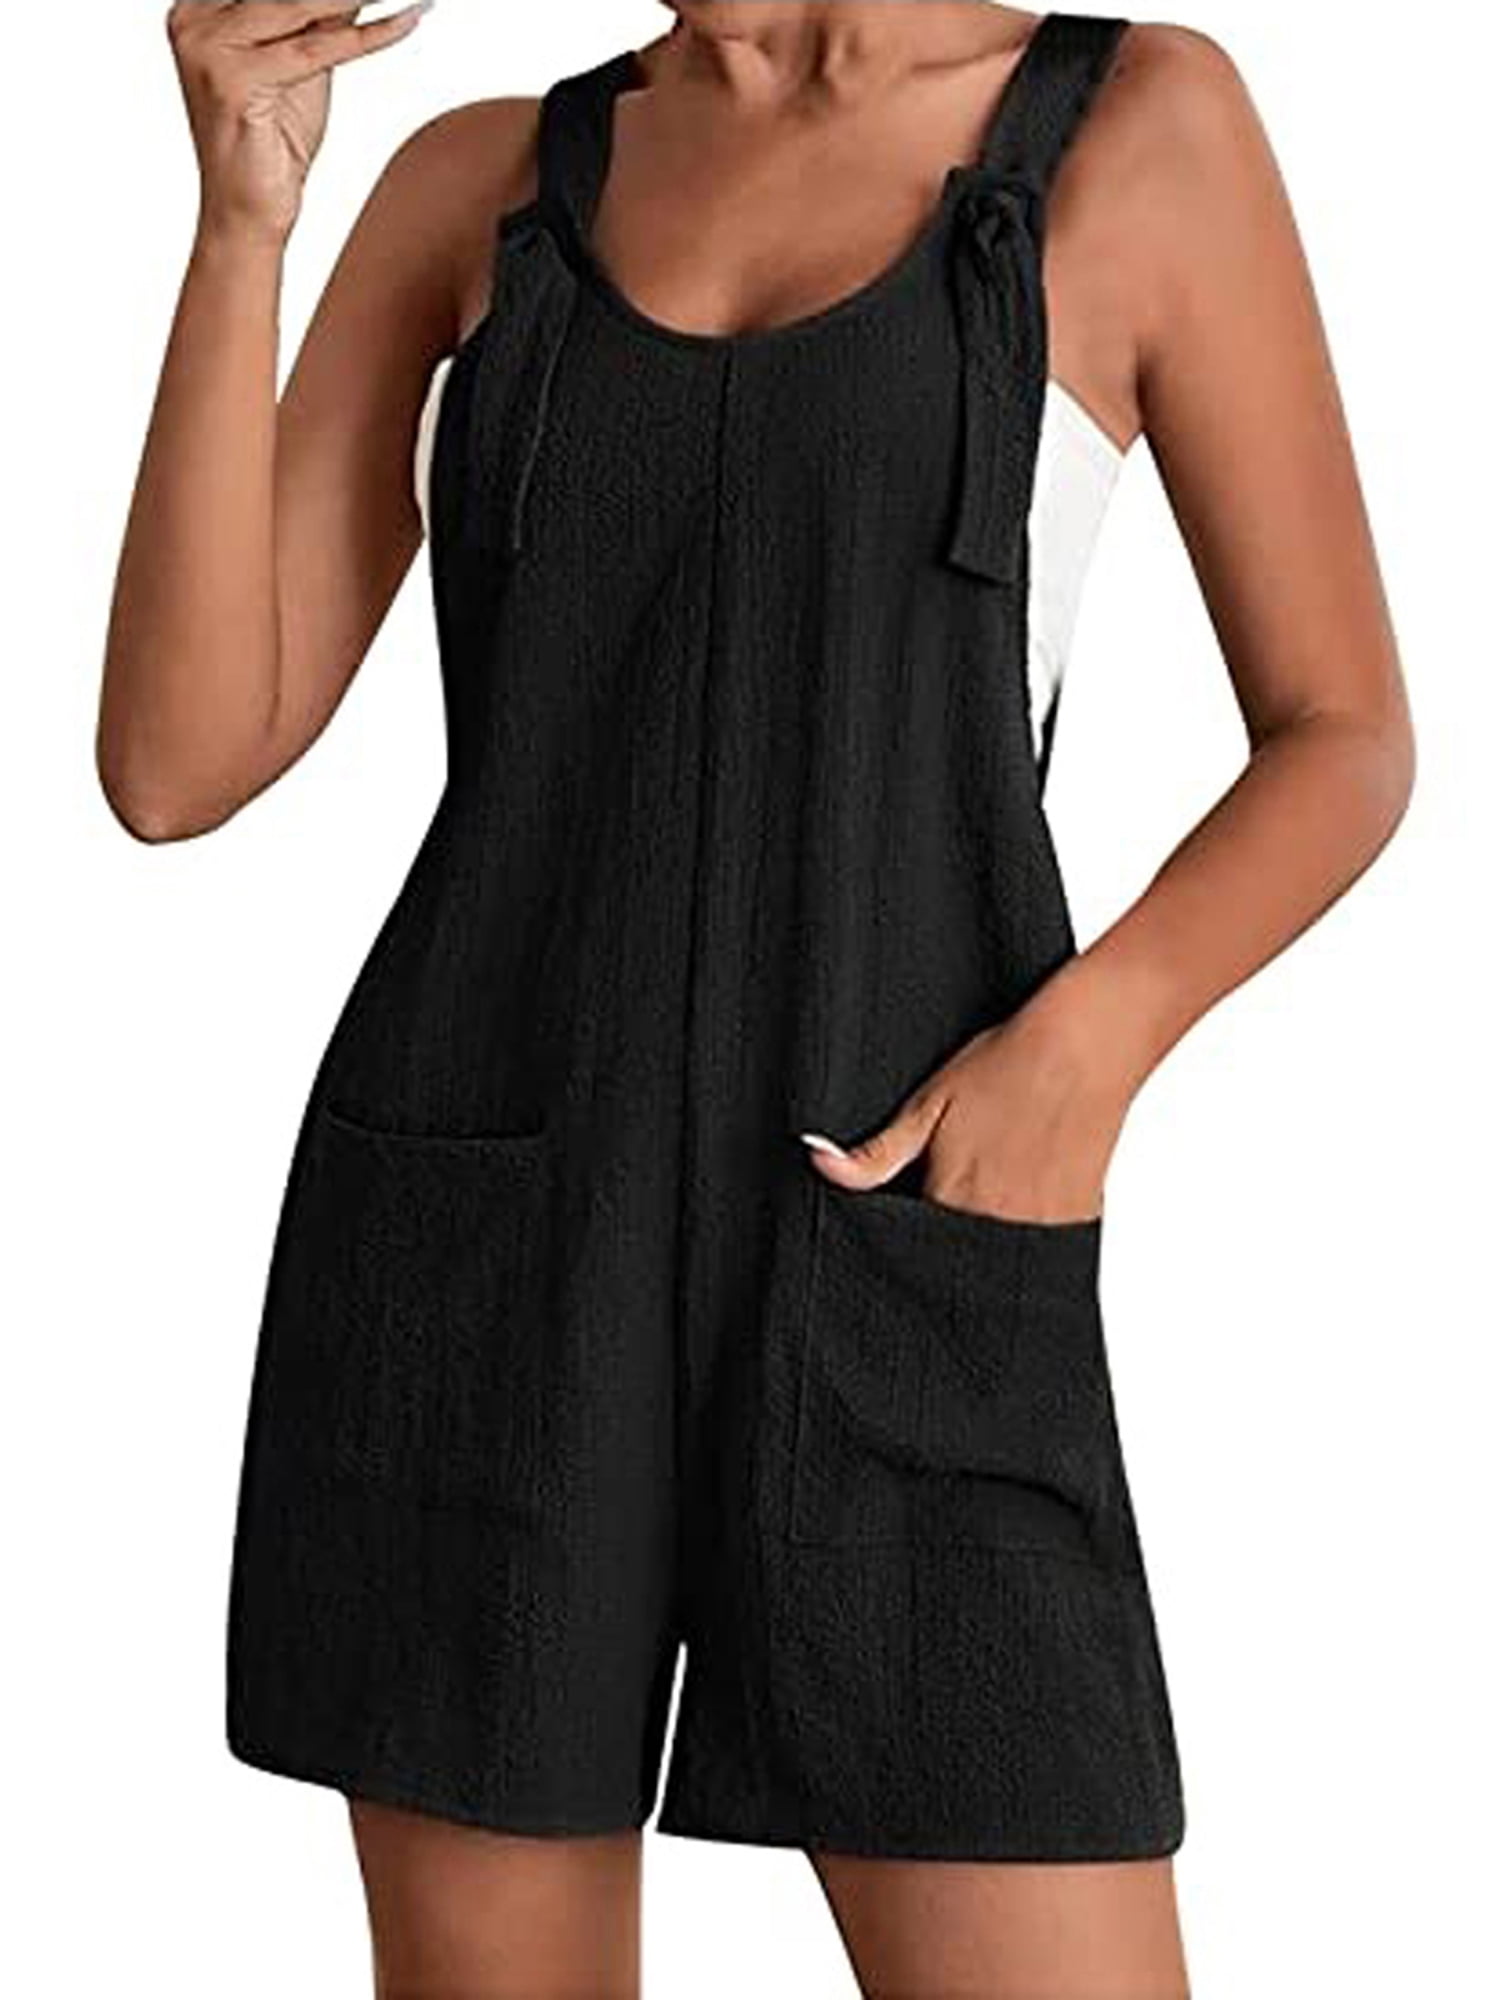 Bagilaanoe Womens Cotton Linen Bib Overall Shorts Casual Loose Fit ...